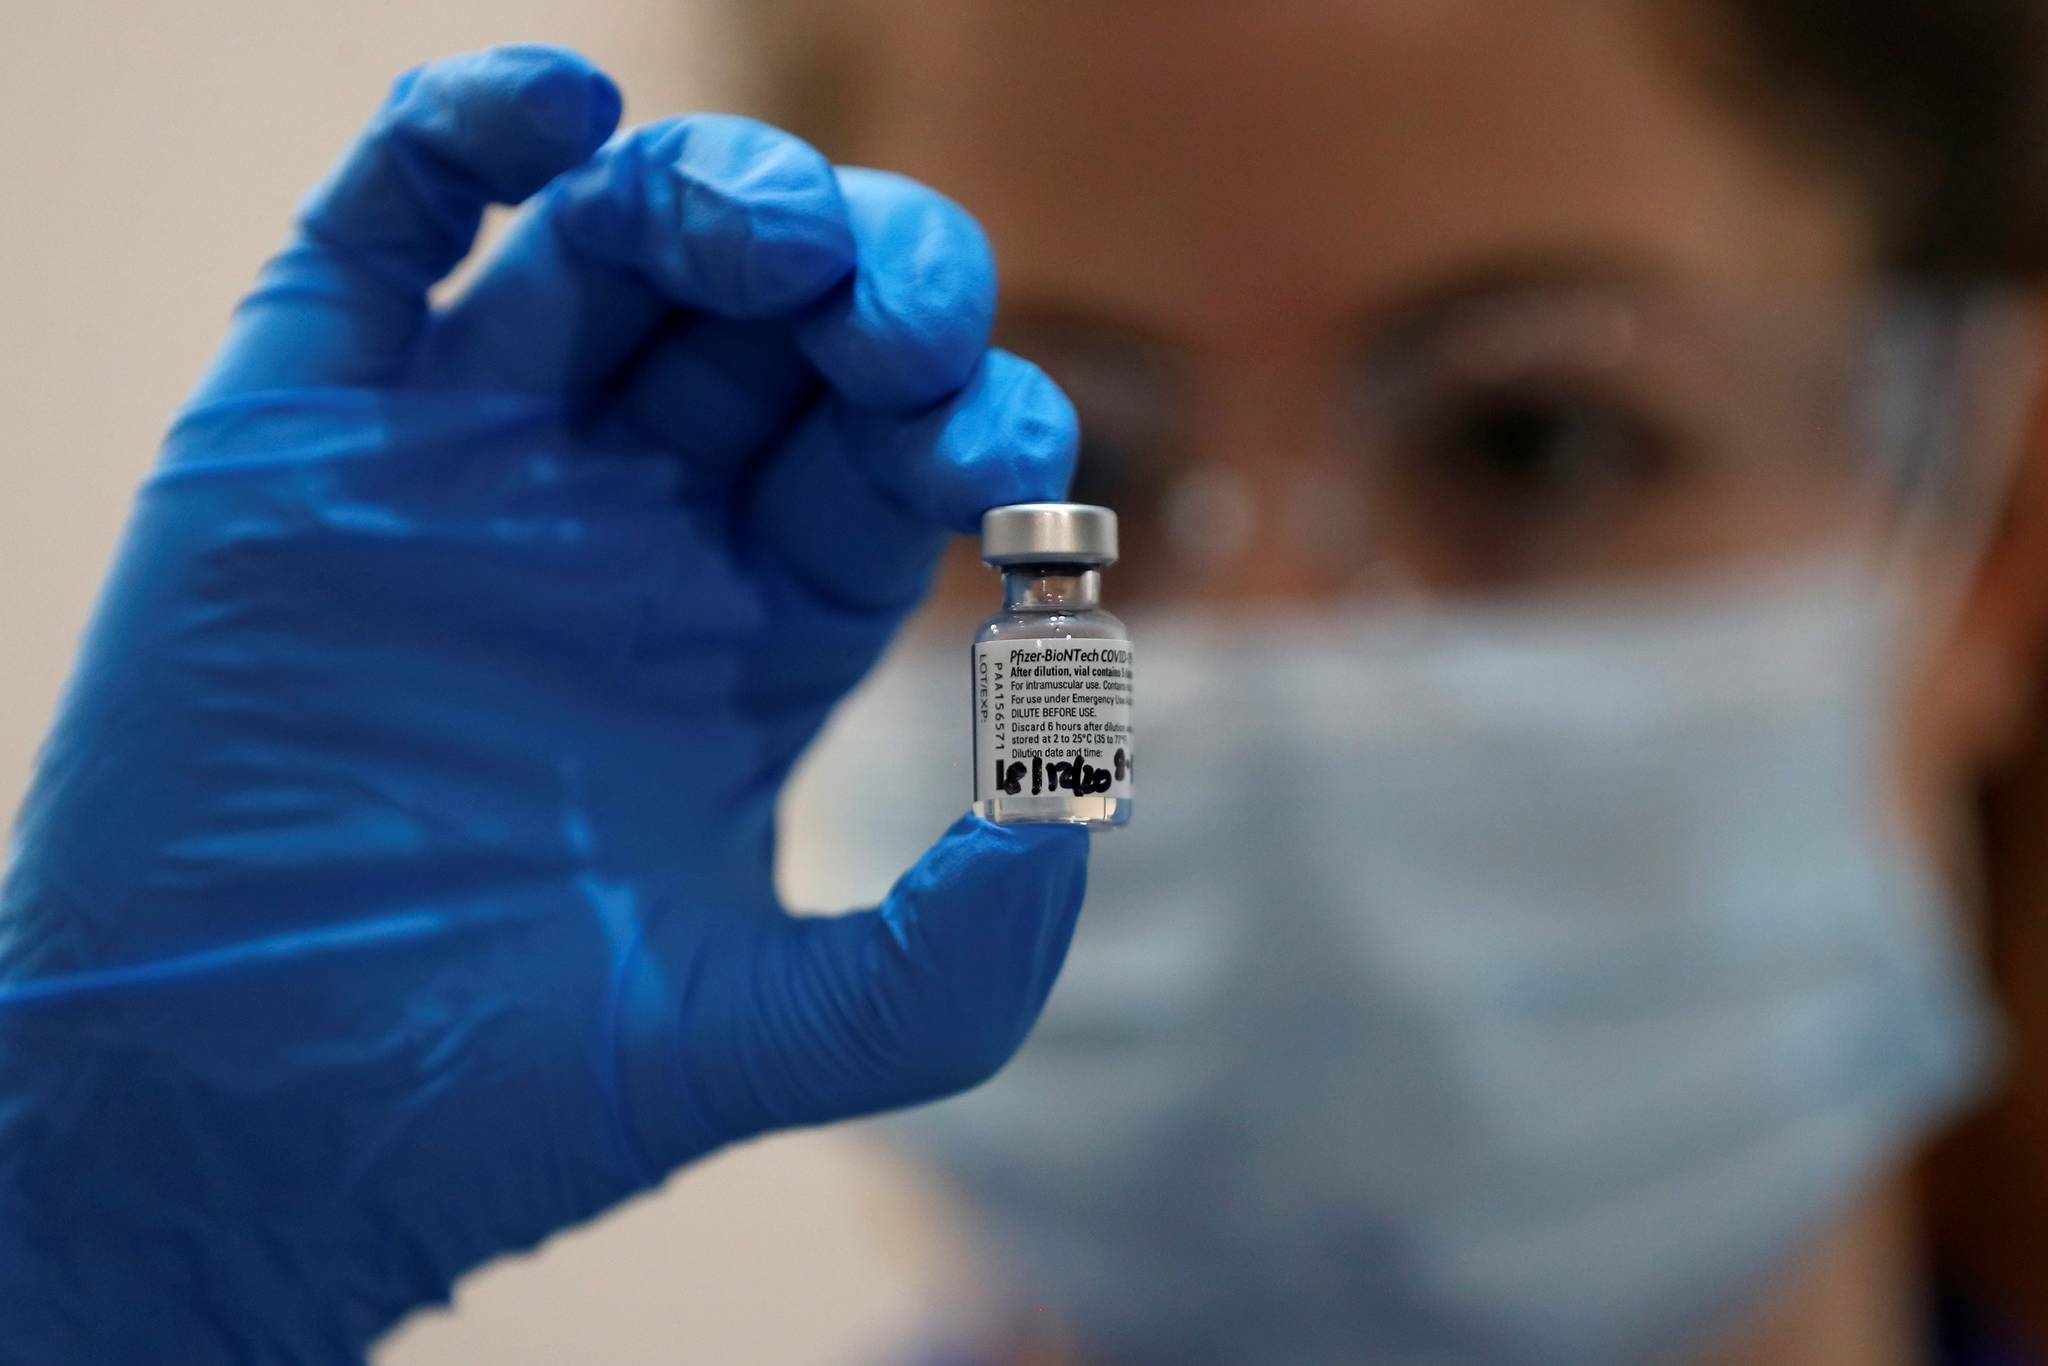 A bill aimed at helping Alaska's hospitals died Monday after provisions were added by lawmakers barring vaccine mandates. In this file photo, a nurse holds a phial of the Pfizer-BioNTech COVID-19 vaccine at Guy’s Hospital in London, Tuesday, Dec. 8, 2020.  (AP Photo/Frank Augstein, Pool)